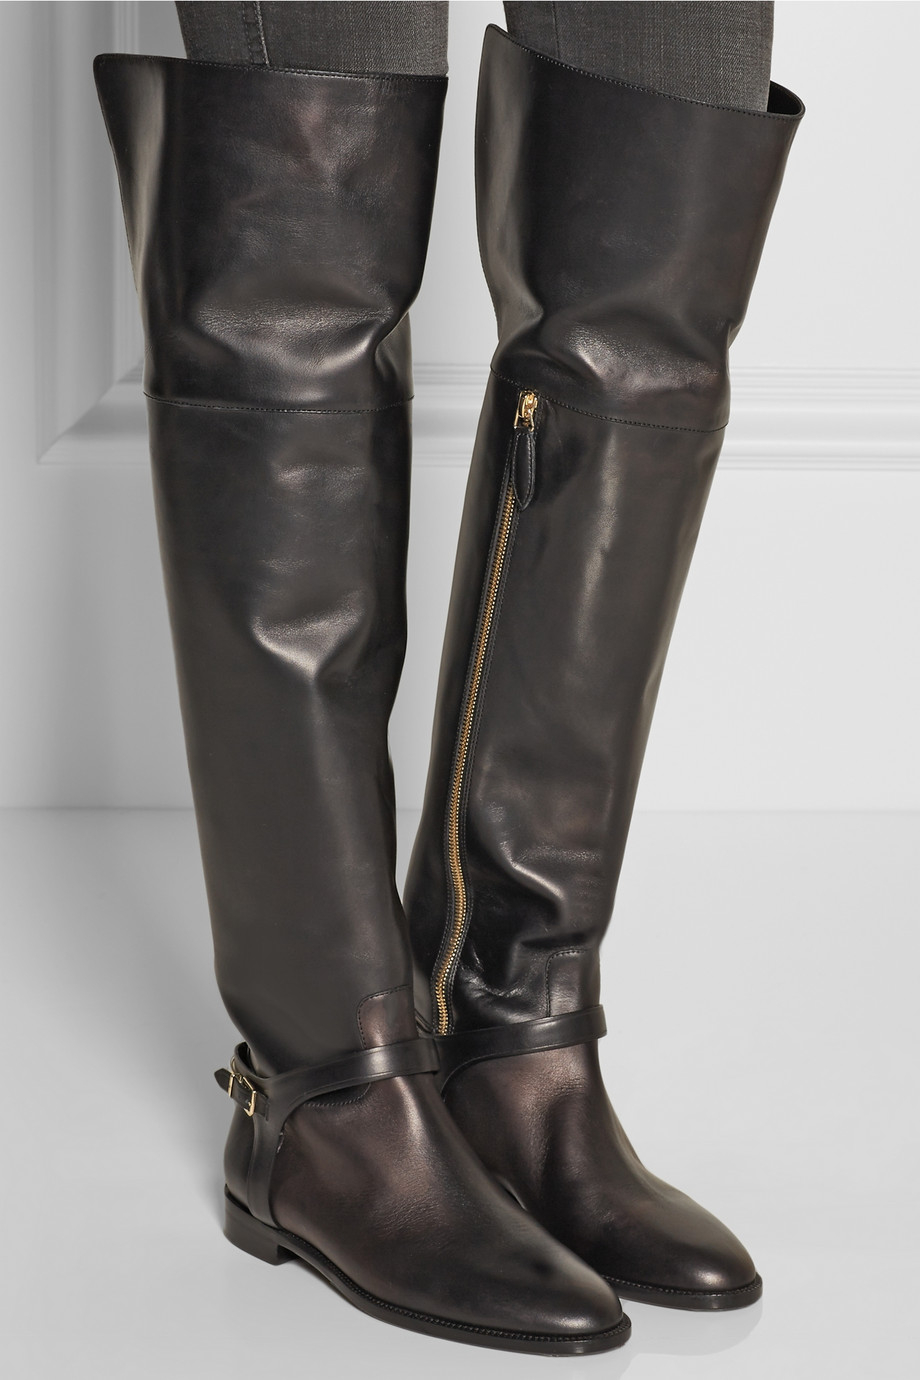 Lyst - Burberry Leather Over-The-Knee Boots in Black